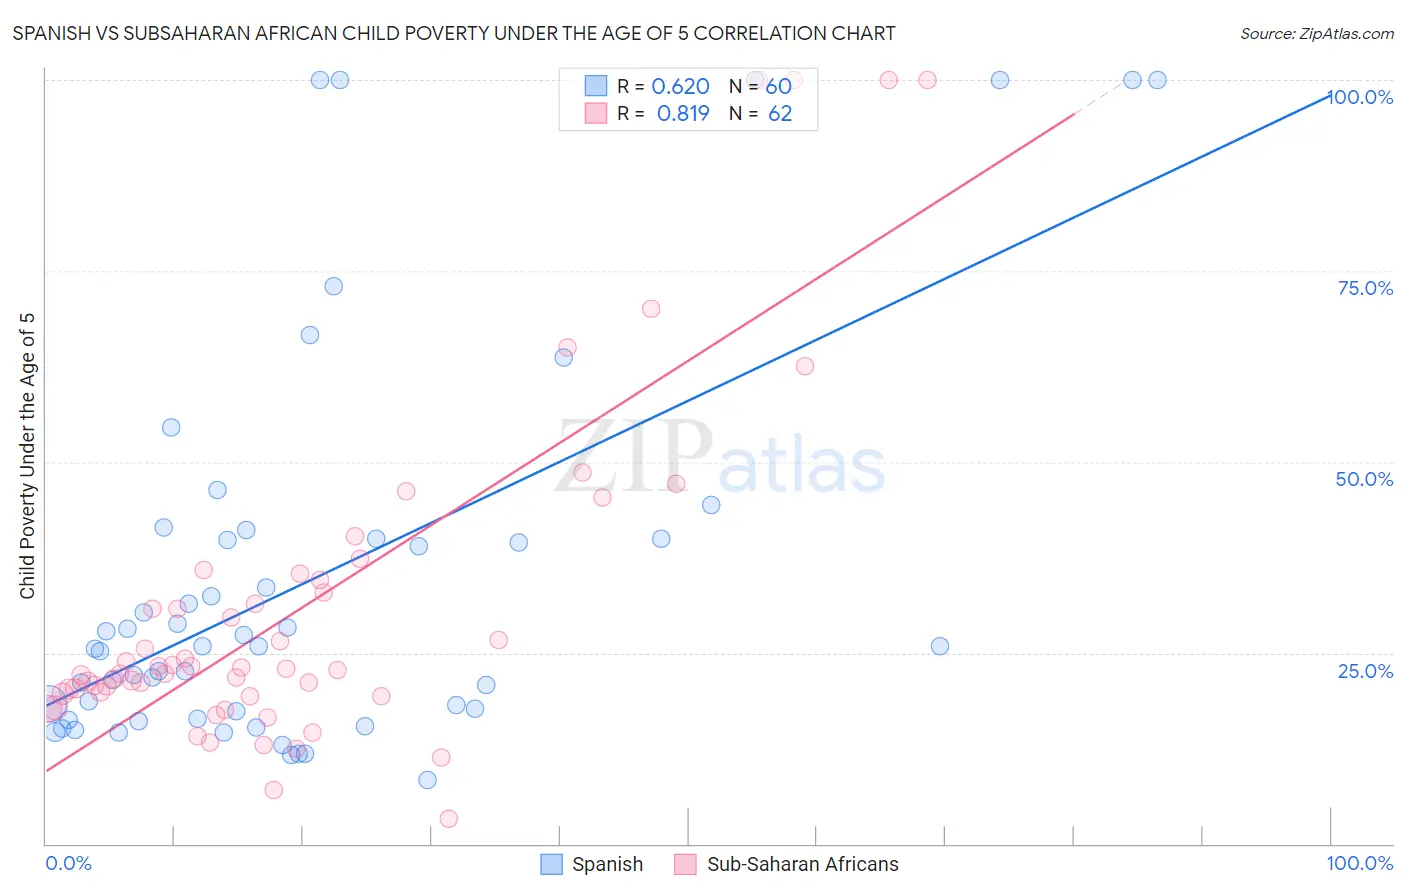 Spanish vs Subsaharan African Child Poverty Under the Age of 5